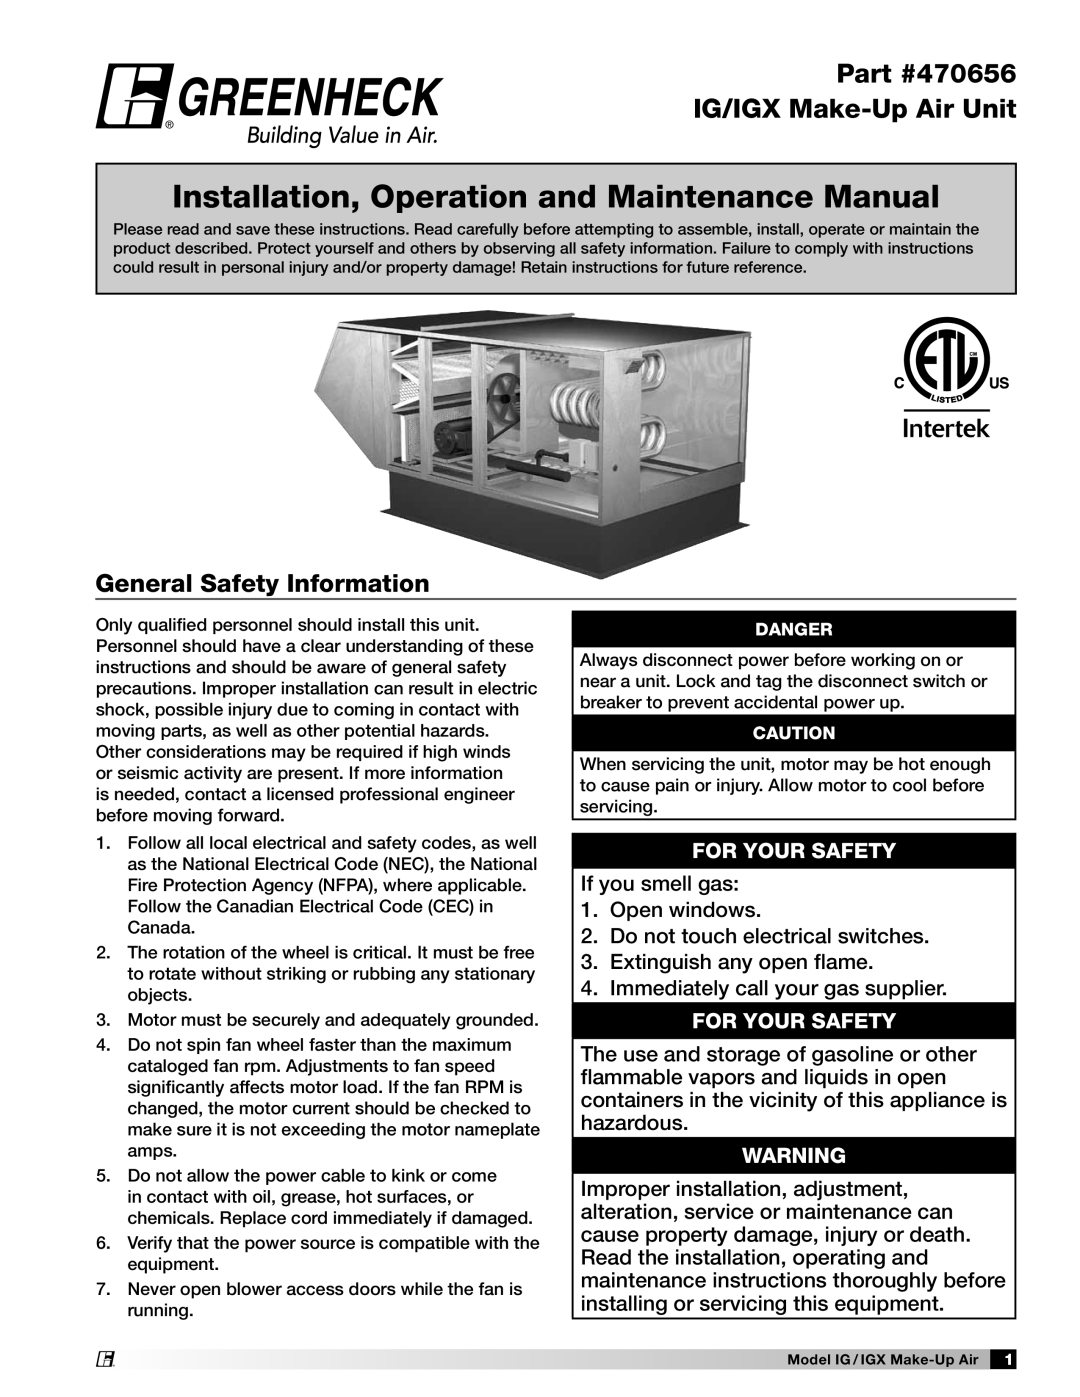 Greenheck Fan 470656 manual General Safety Information, For Your Safety, If you smell gas 1.Open windows, Danger 